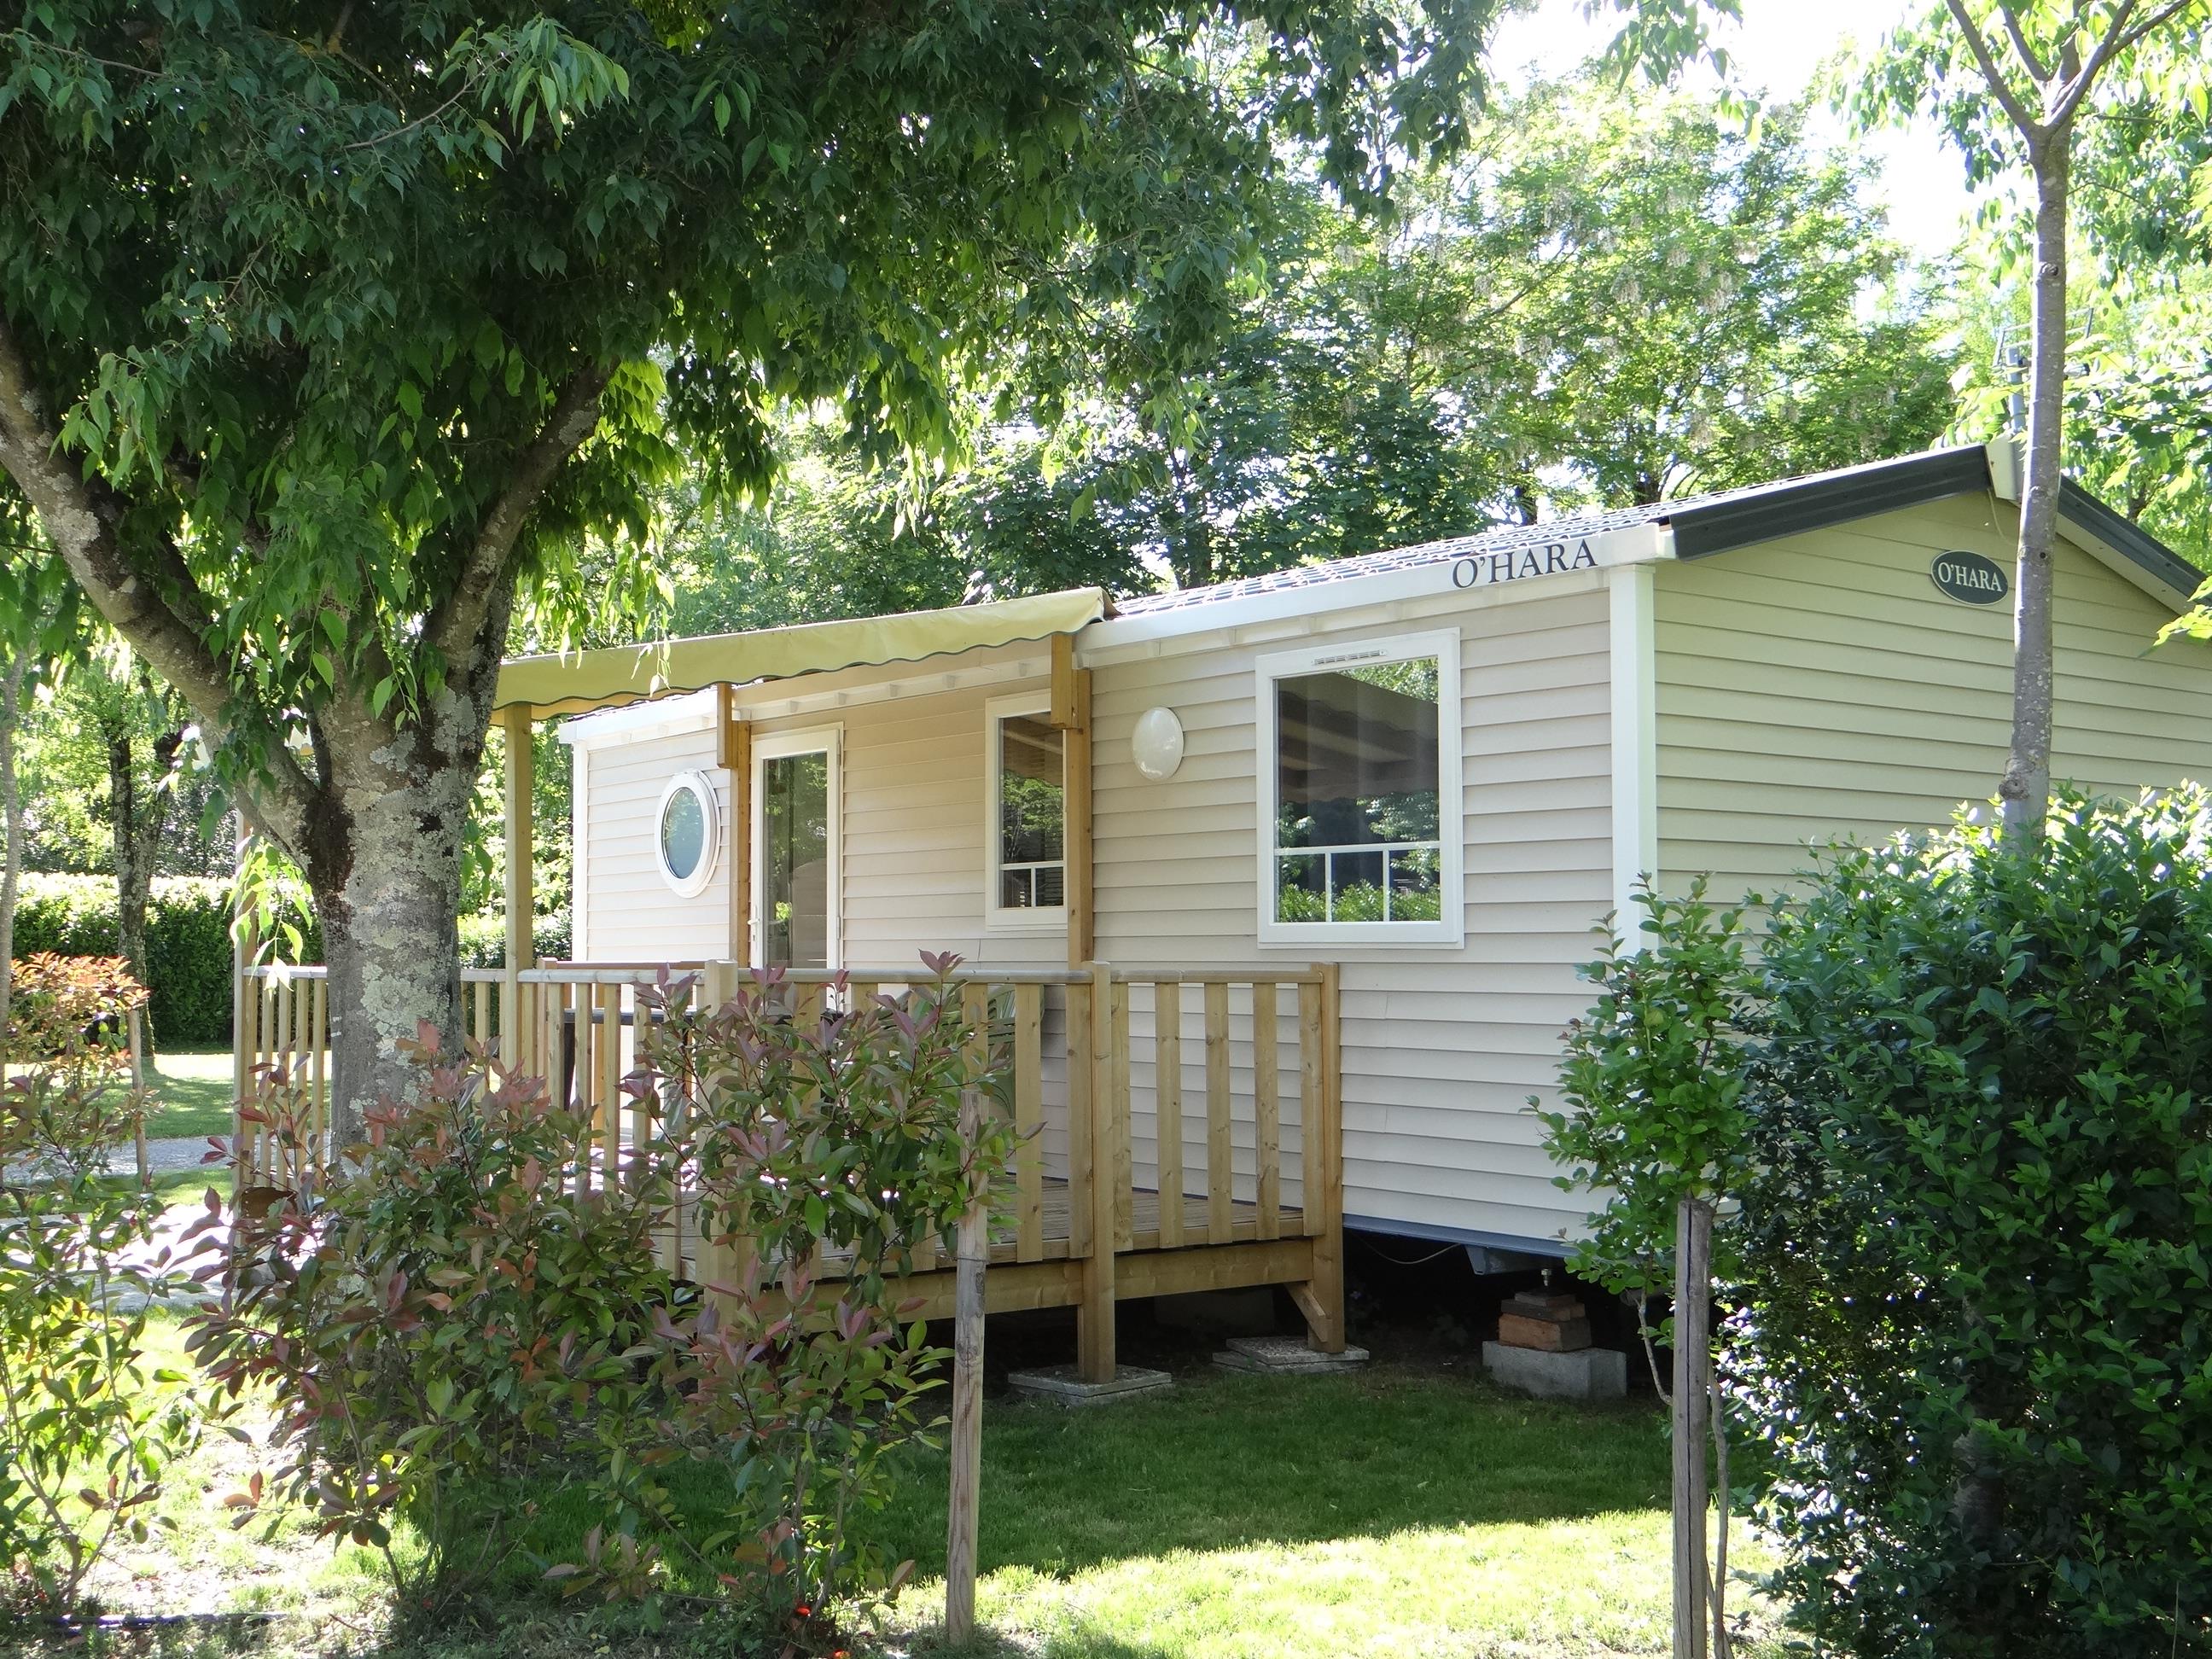 Huuraccommodatie - Mobil Home 3 Bedrooms On Sunday (July/August) - CAMPING LES HORTENSIAS